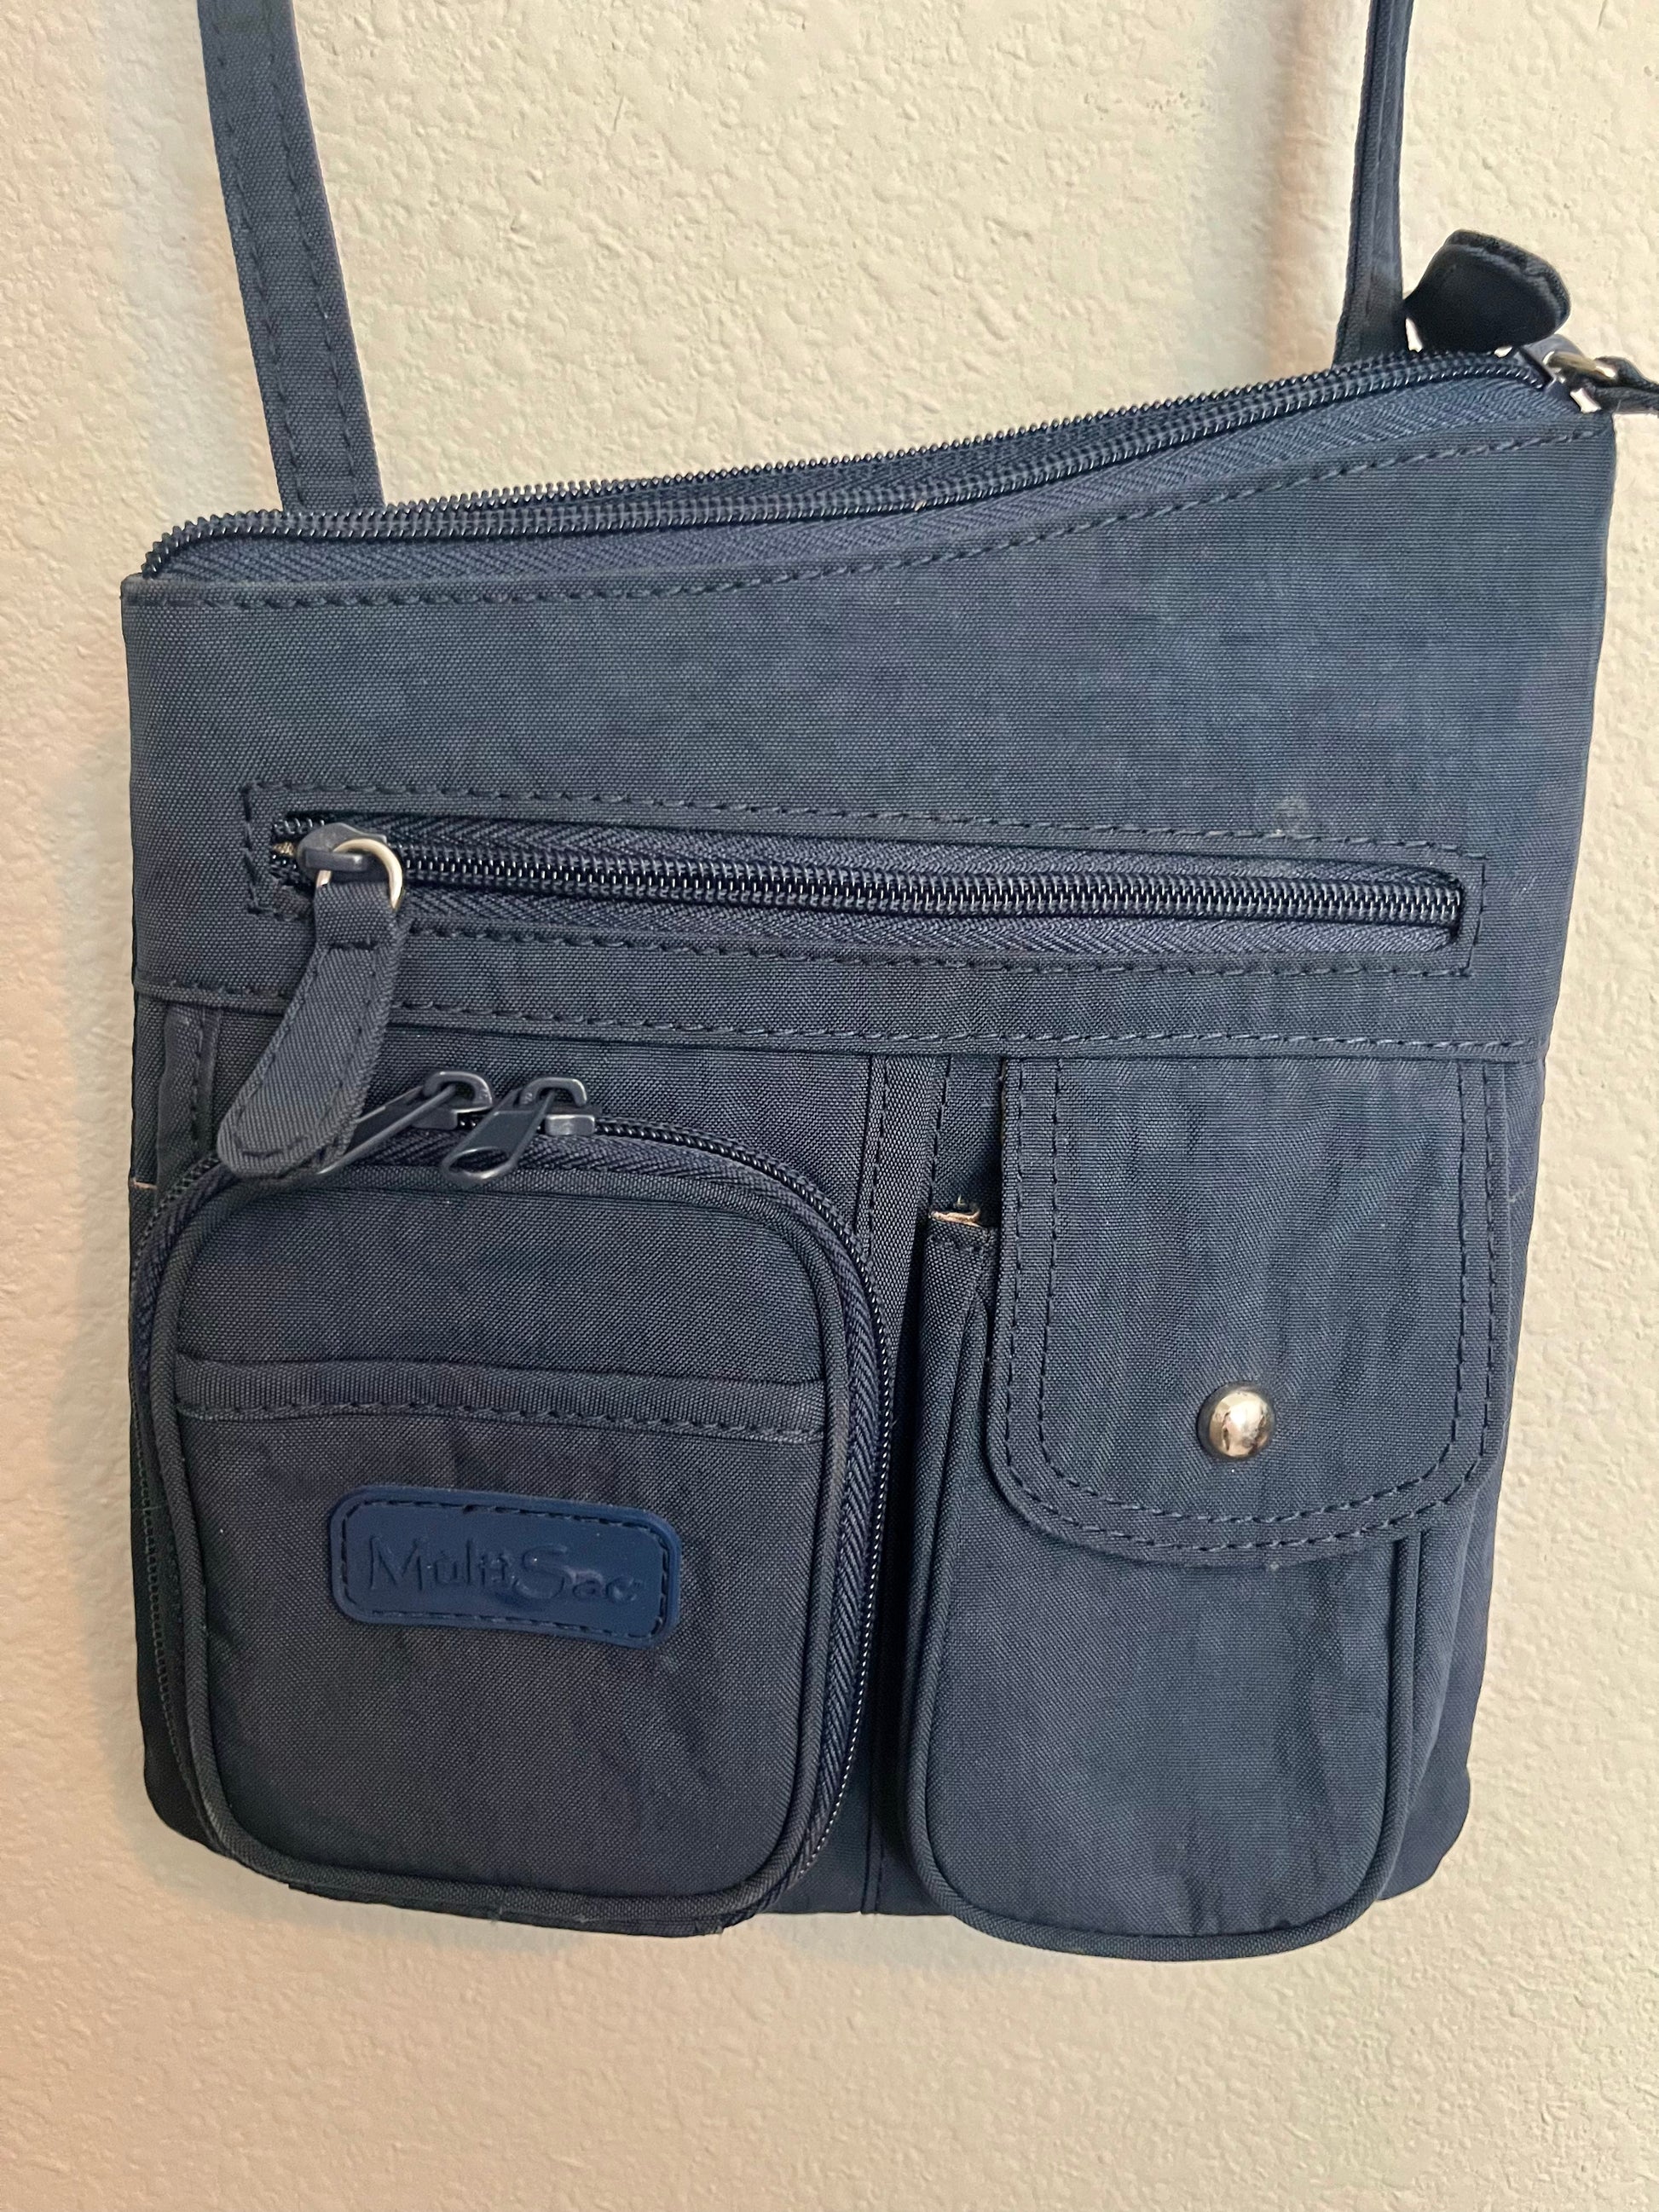 Navy Blue Multi-Sac Crossbody Purse - Tales from the Tangle